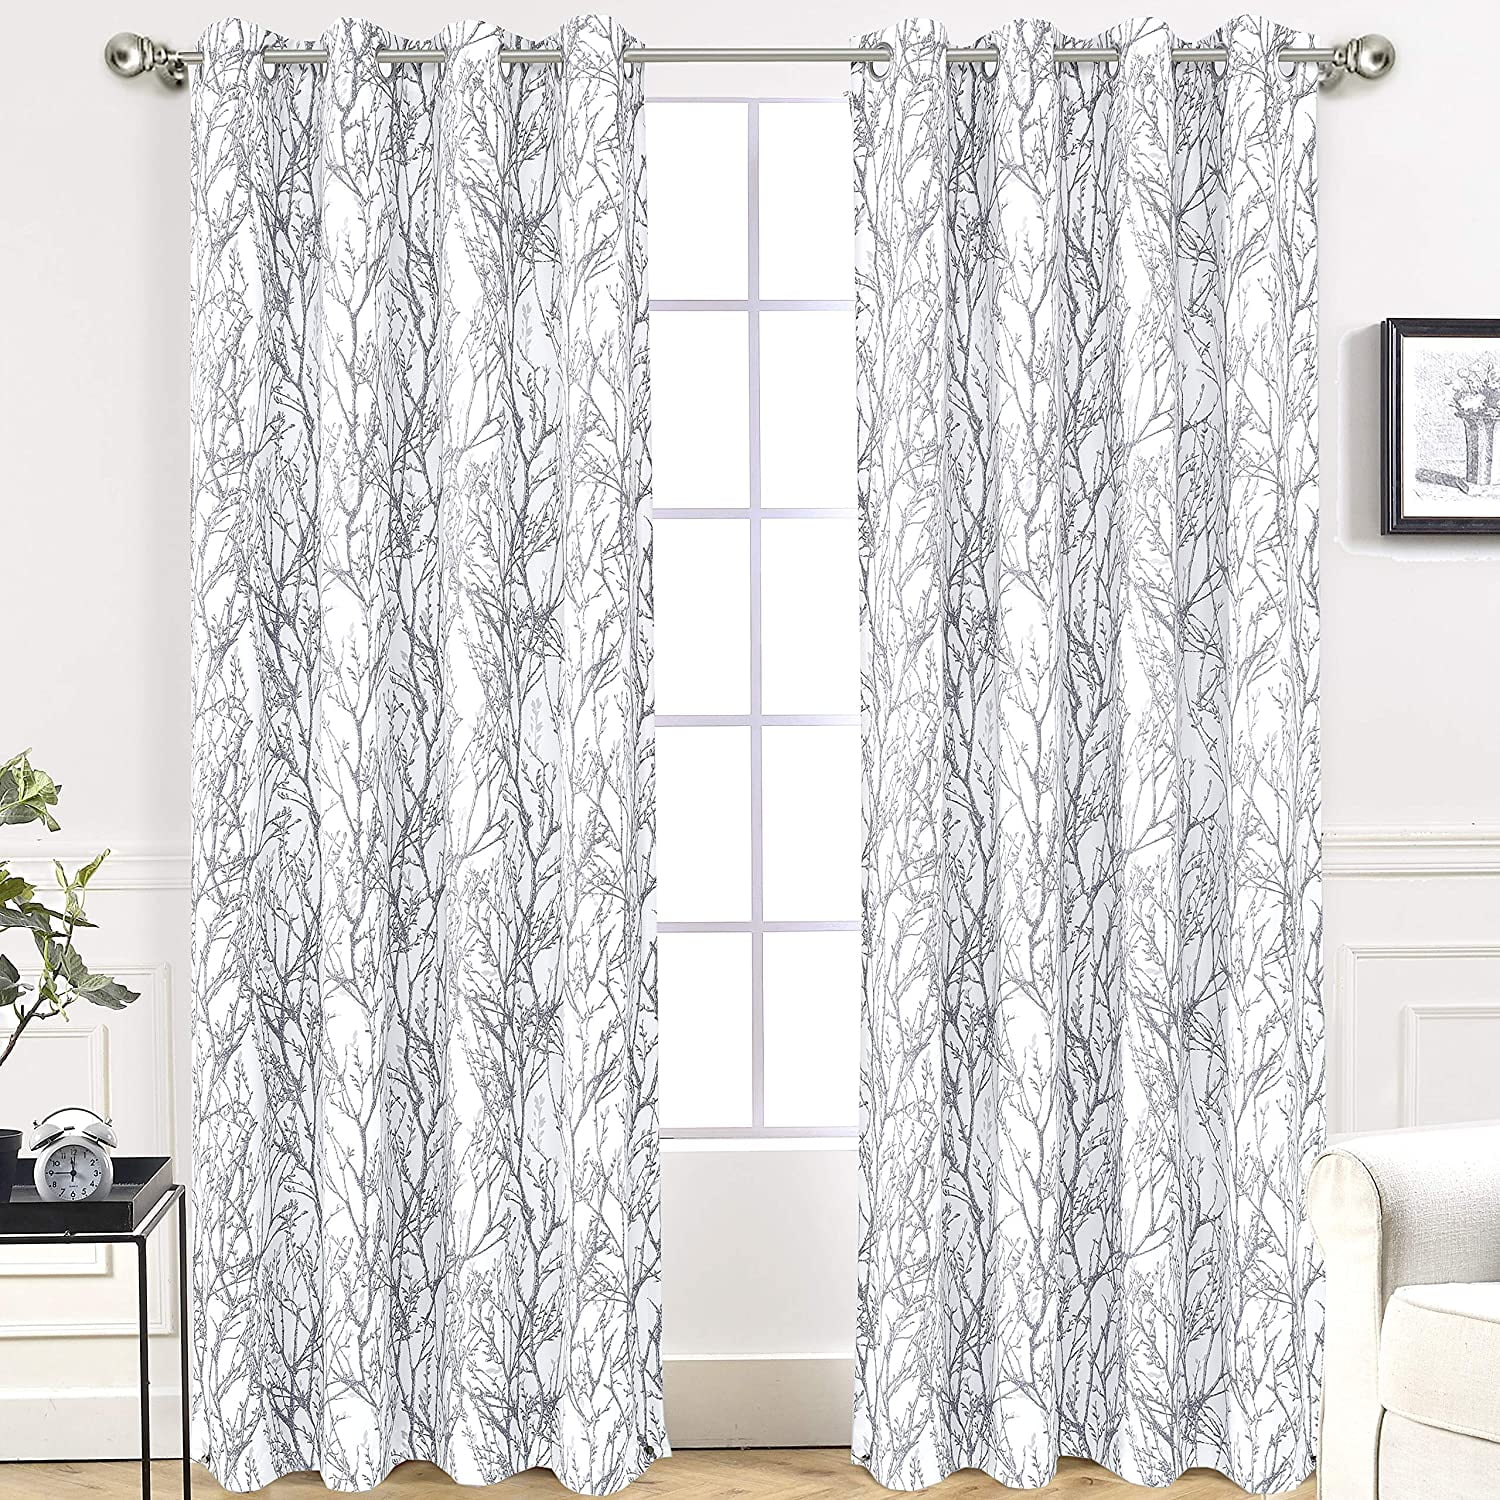 Room Darking Soft Curtain Panels for Living/Bedroom Room and Patio Door Set of 2 Grommet Semi-Blackout Curtain Light Gray/White 52 x 84 Total W 104 Decorative Geometric Trellis Pattern 